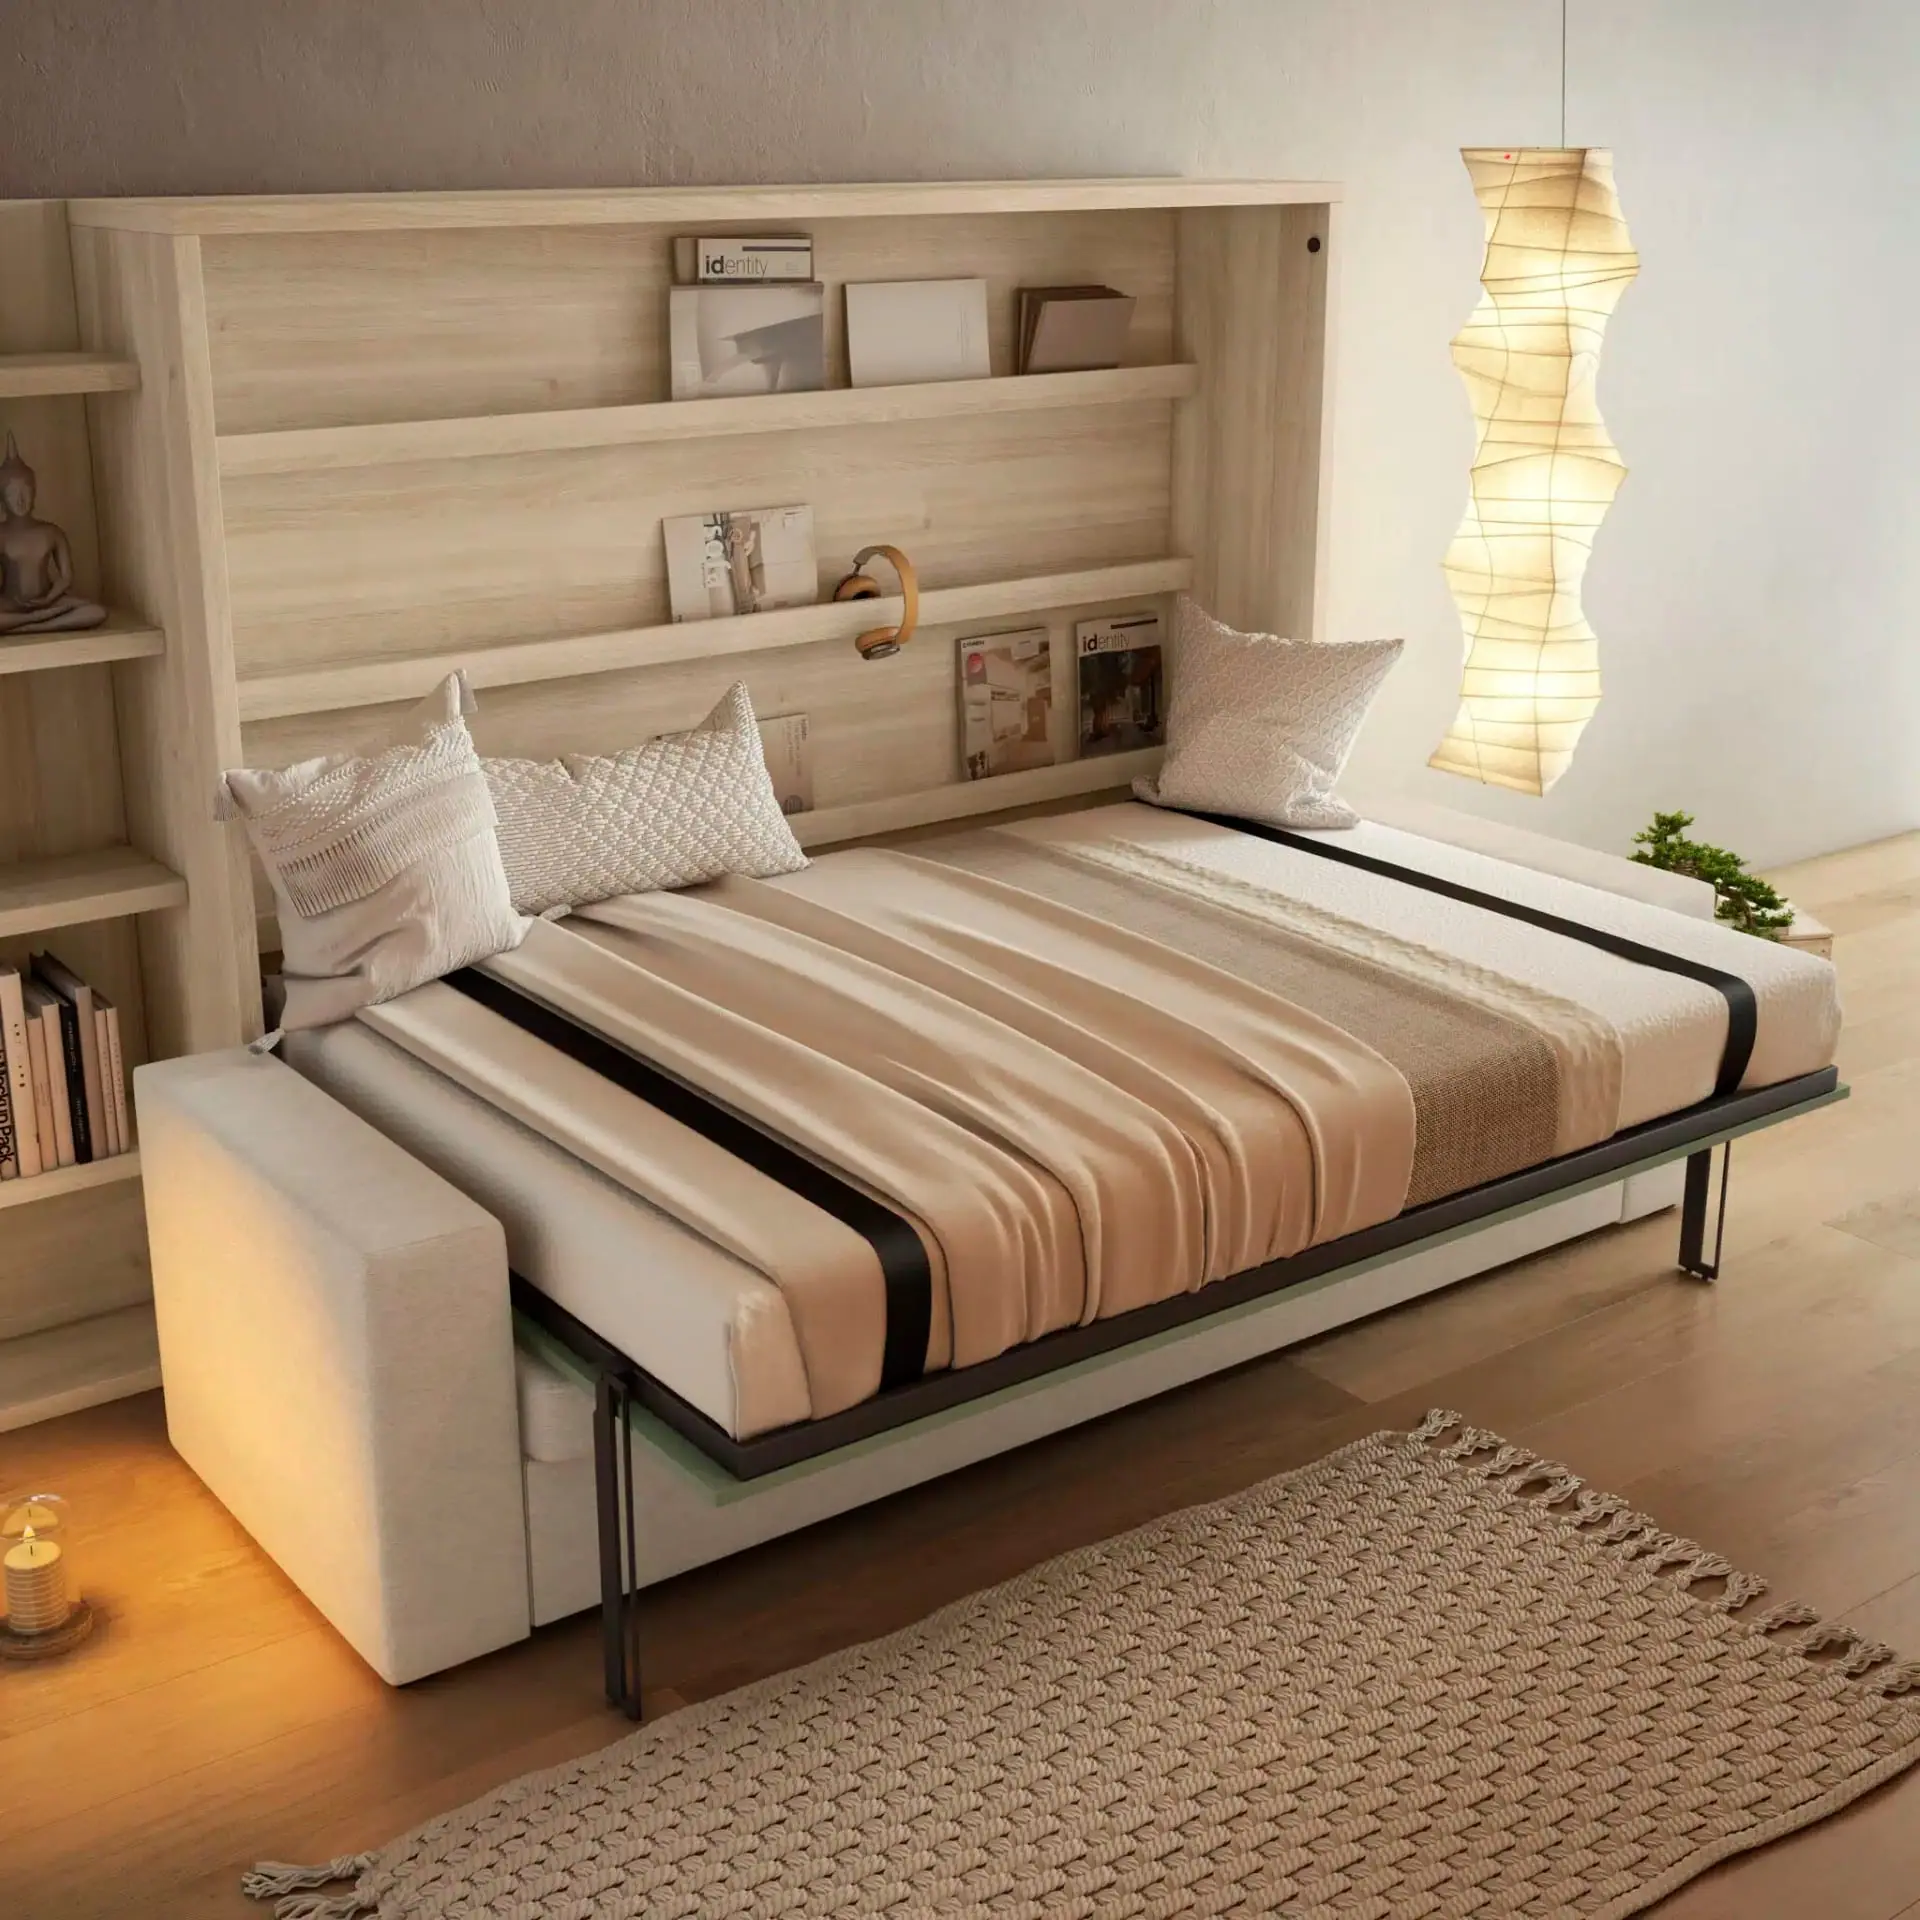 ros-reloveution-fold-down-bed-with-sofa02